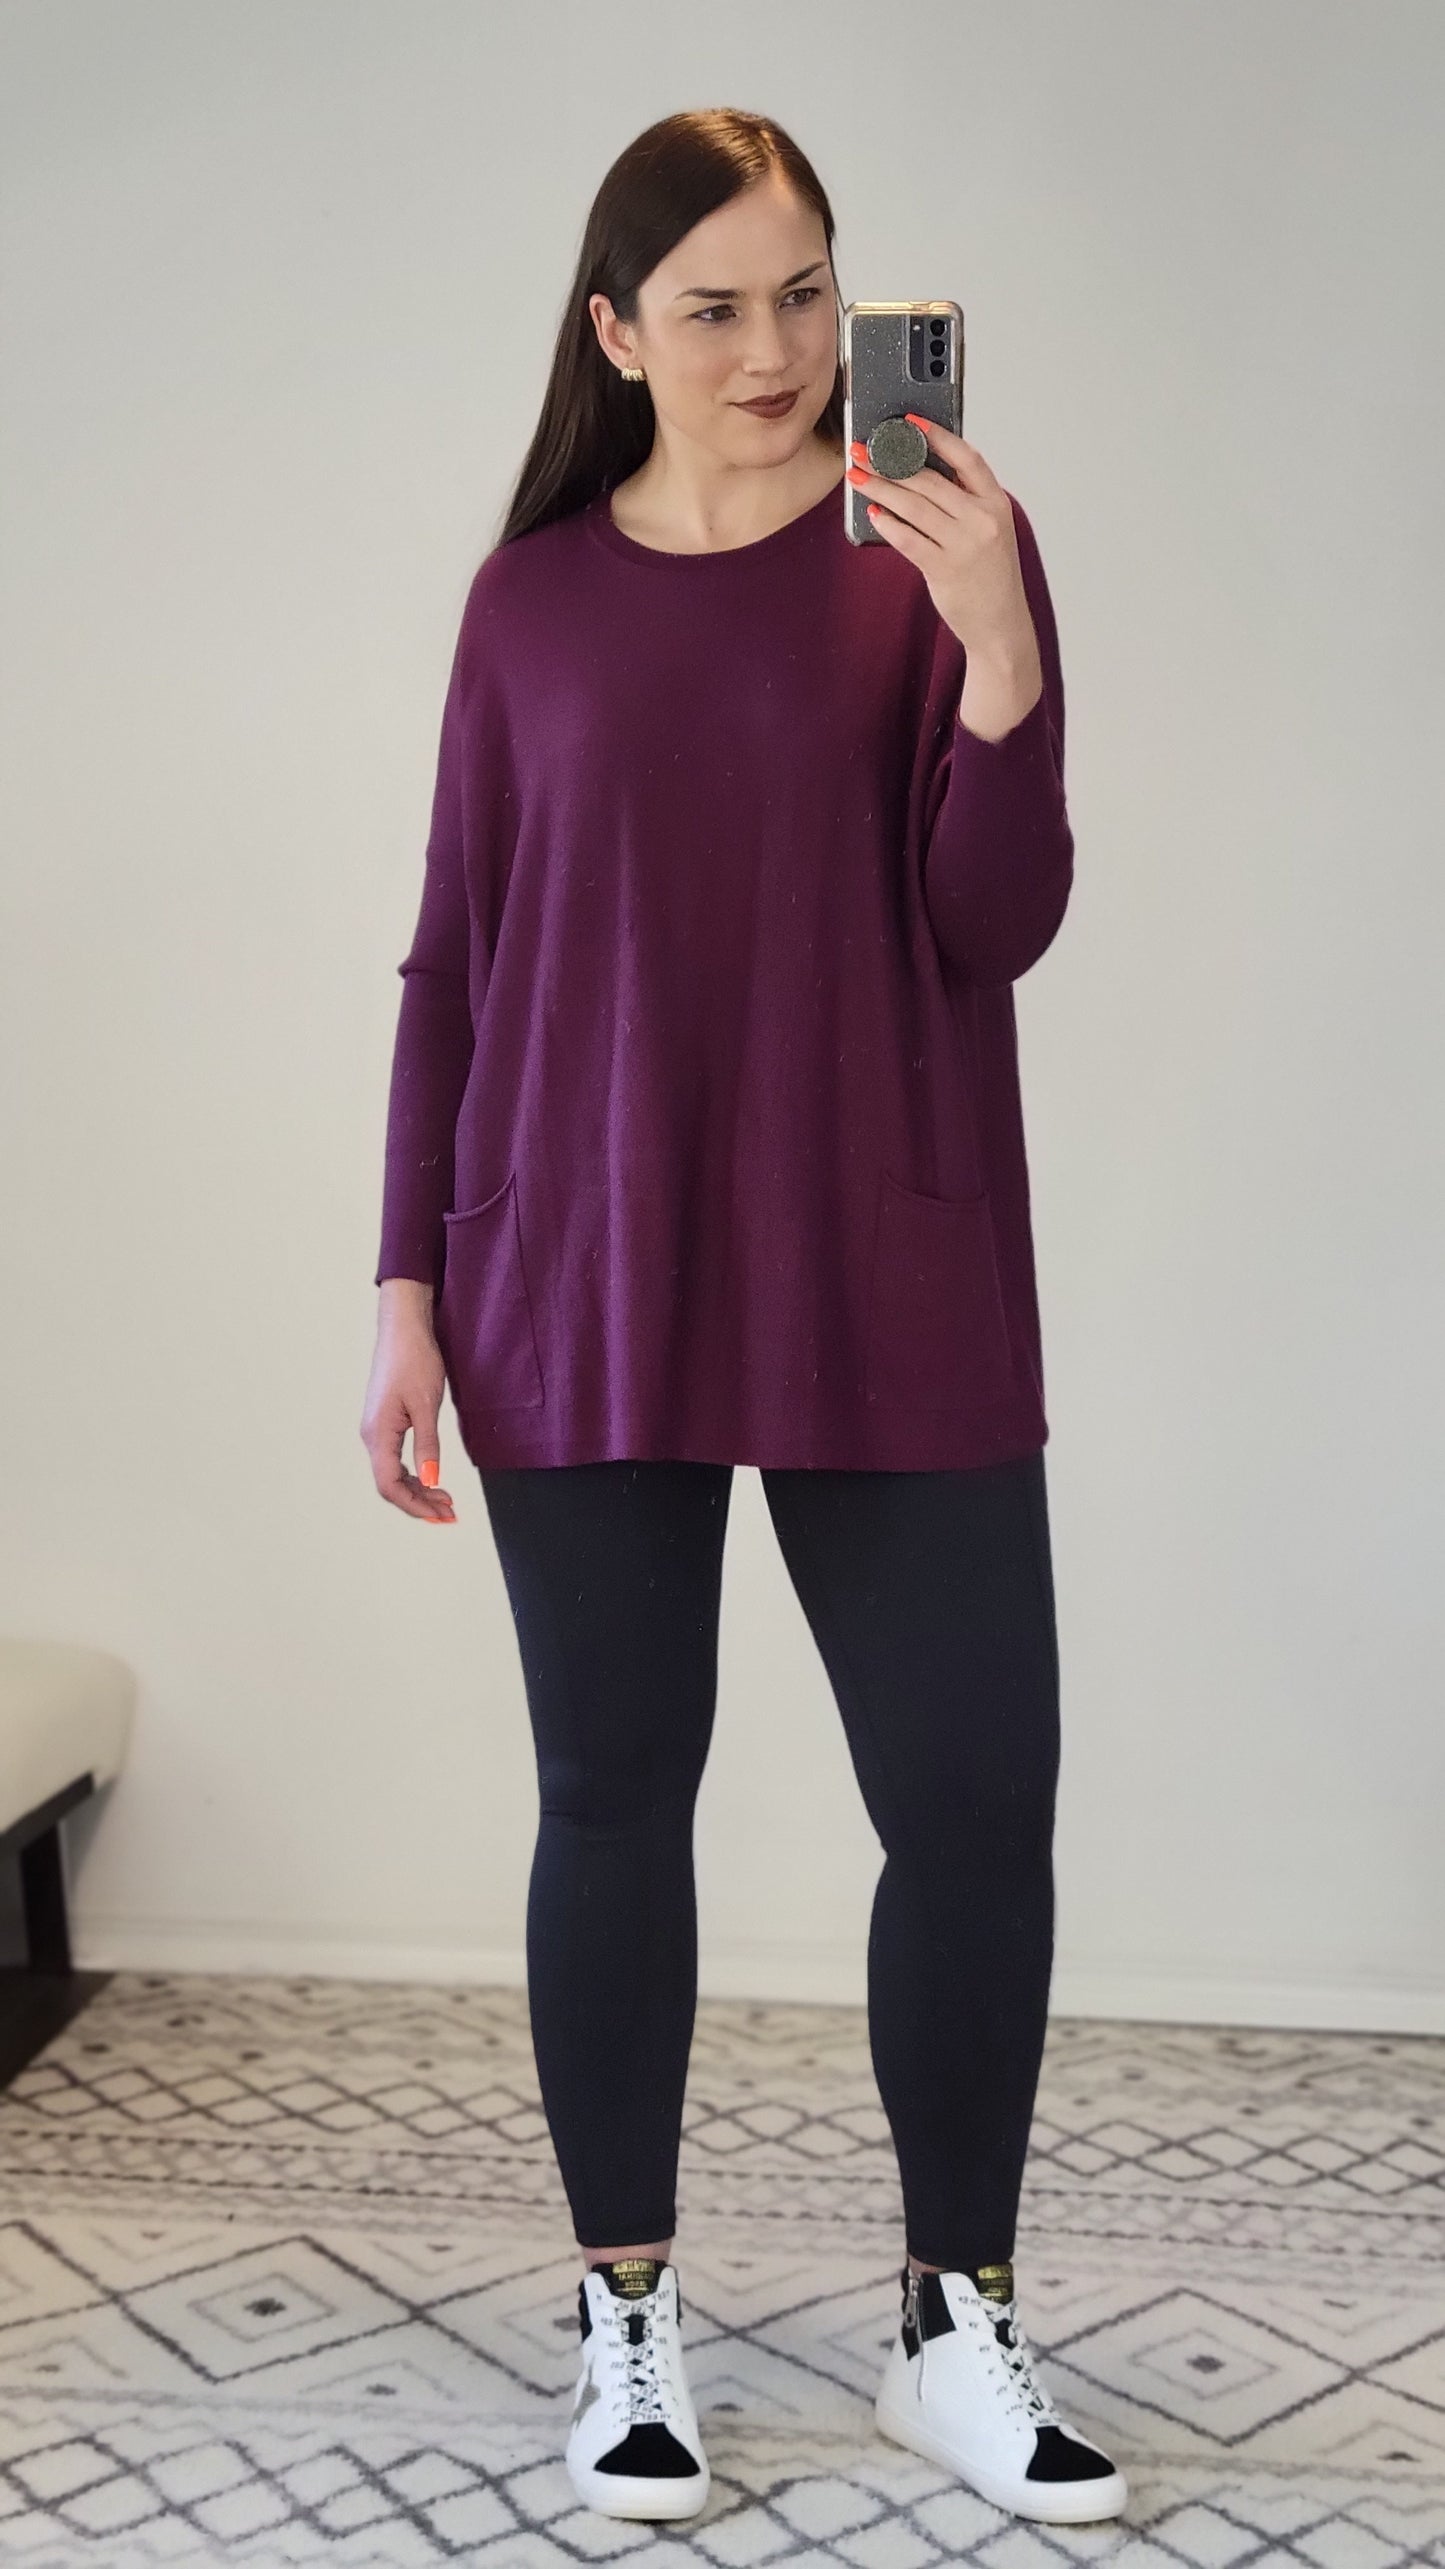 Mulberry Oversize Knit Sweater with Two Front Pockets "Callie"